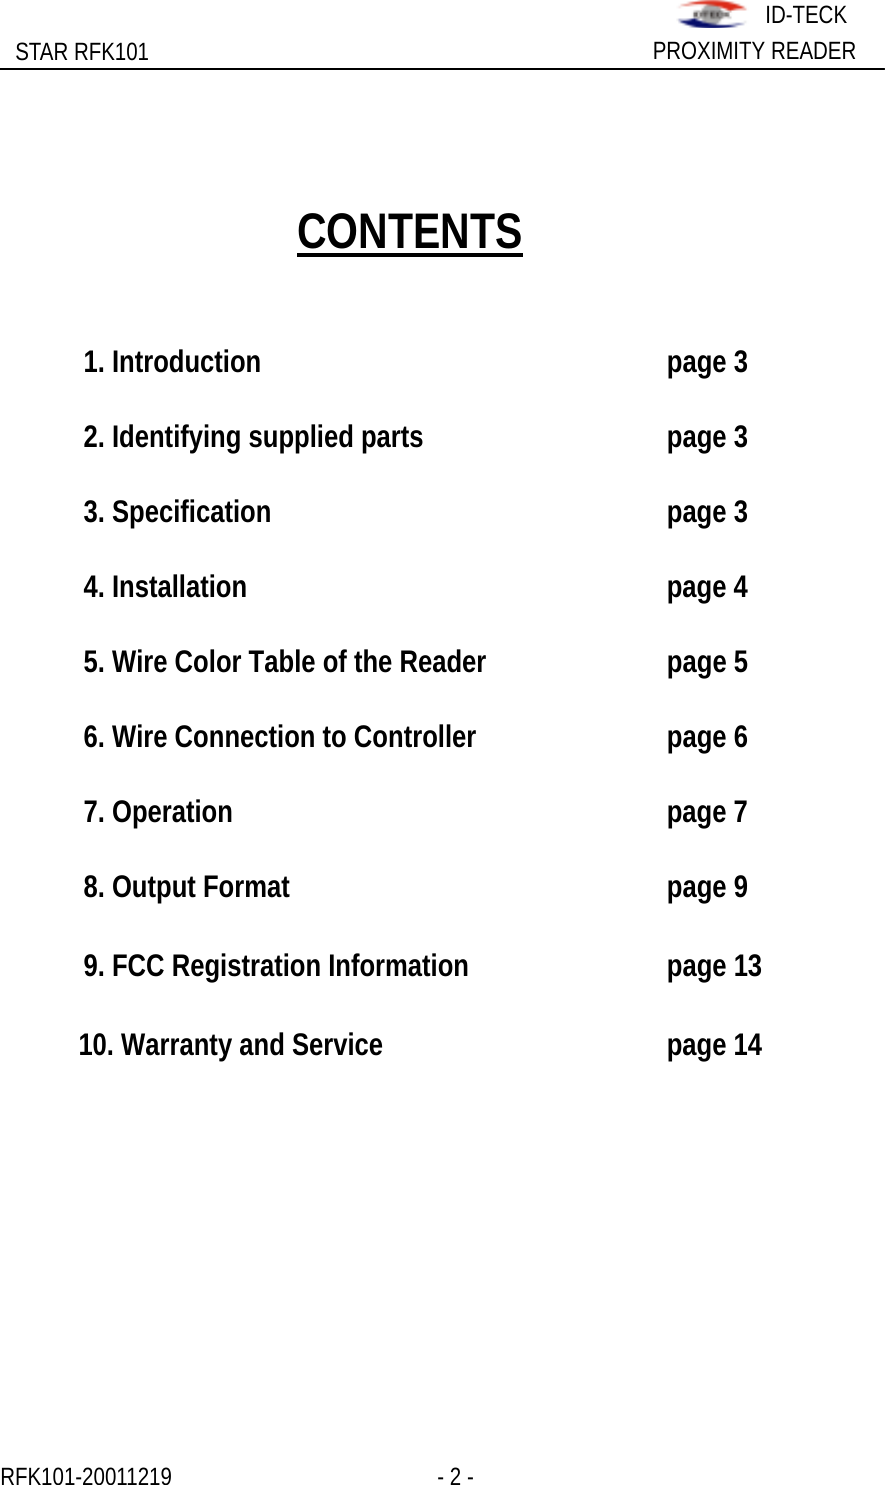                                                              STAR RFK101  PROXIMITY READER ID-TECK             CONTENTS    1. Introduction      page 3    2. Identifying supplied parts        page 3   3. Specification     page 3   4. Installation      page 4    5. Wire Color Table of the Reader      page 5    6. Wire Connection to Controller      page 6   7. Operation      page 7   8. Output Format     page 9    9. FCC Registration Information      page 13  10. Warranty and Service        page 14           RFK101-20011219                 - 2 -                    